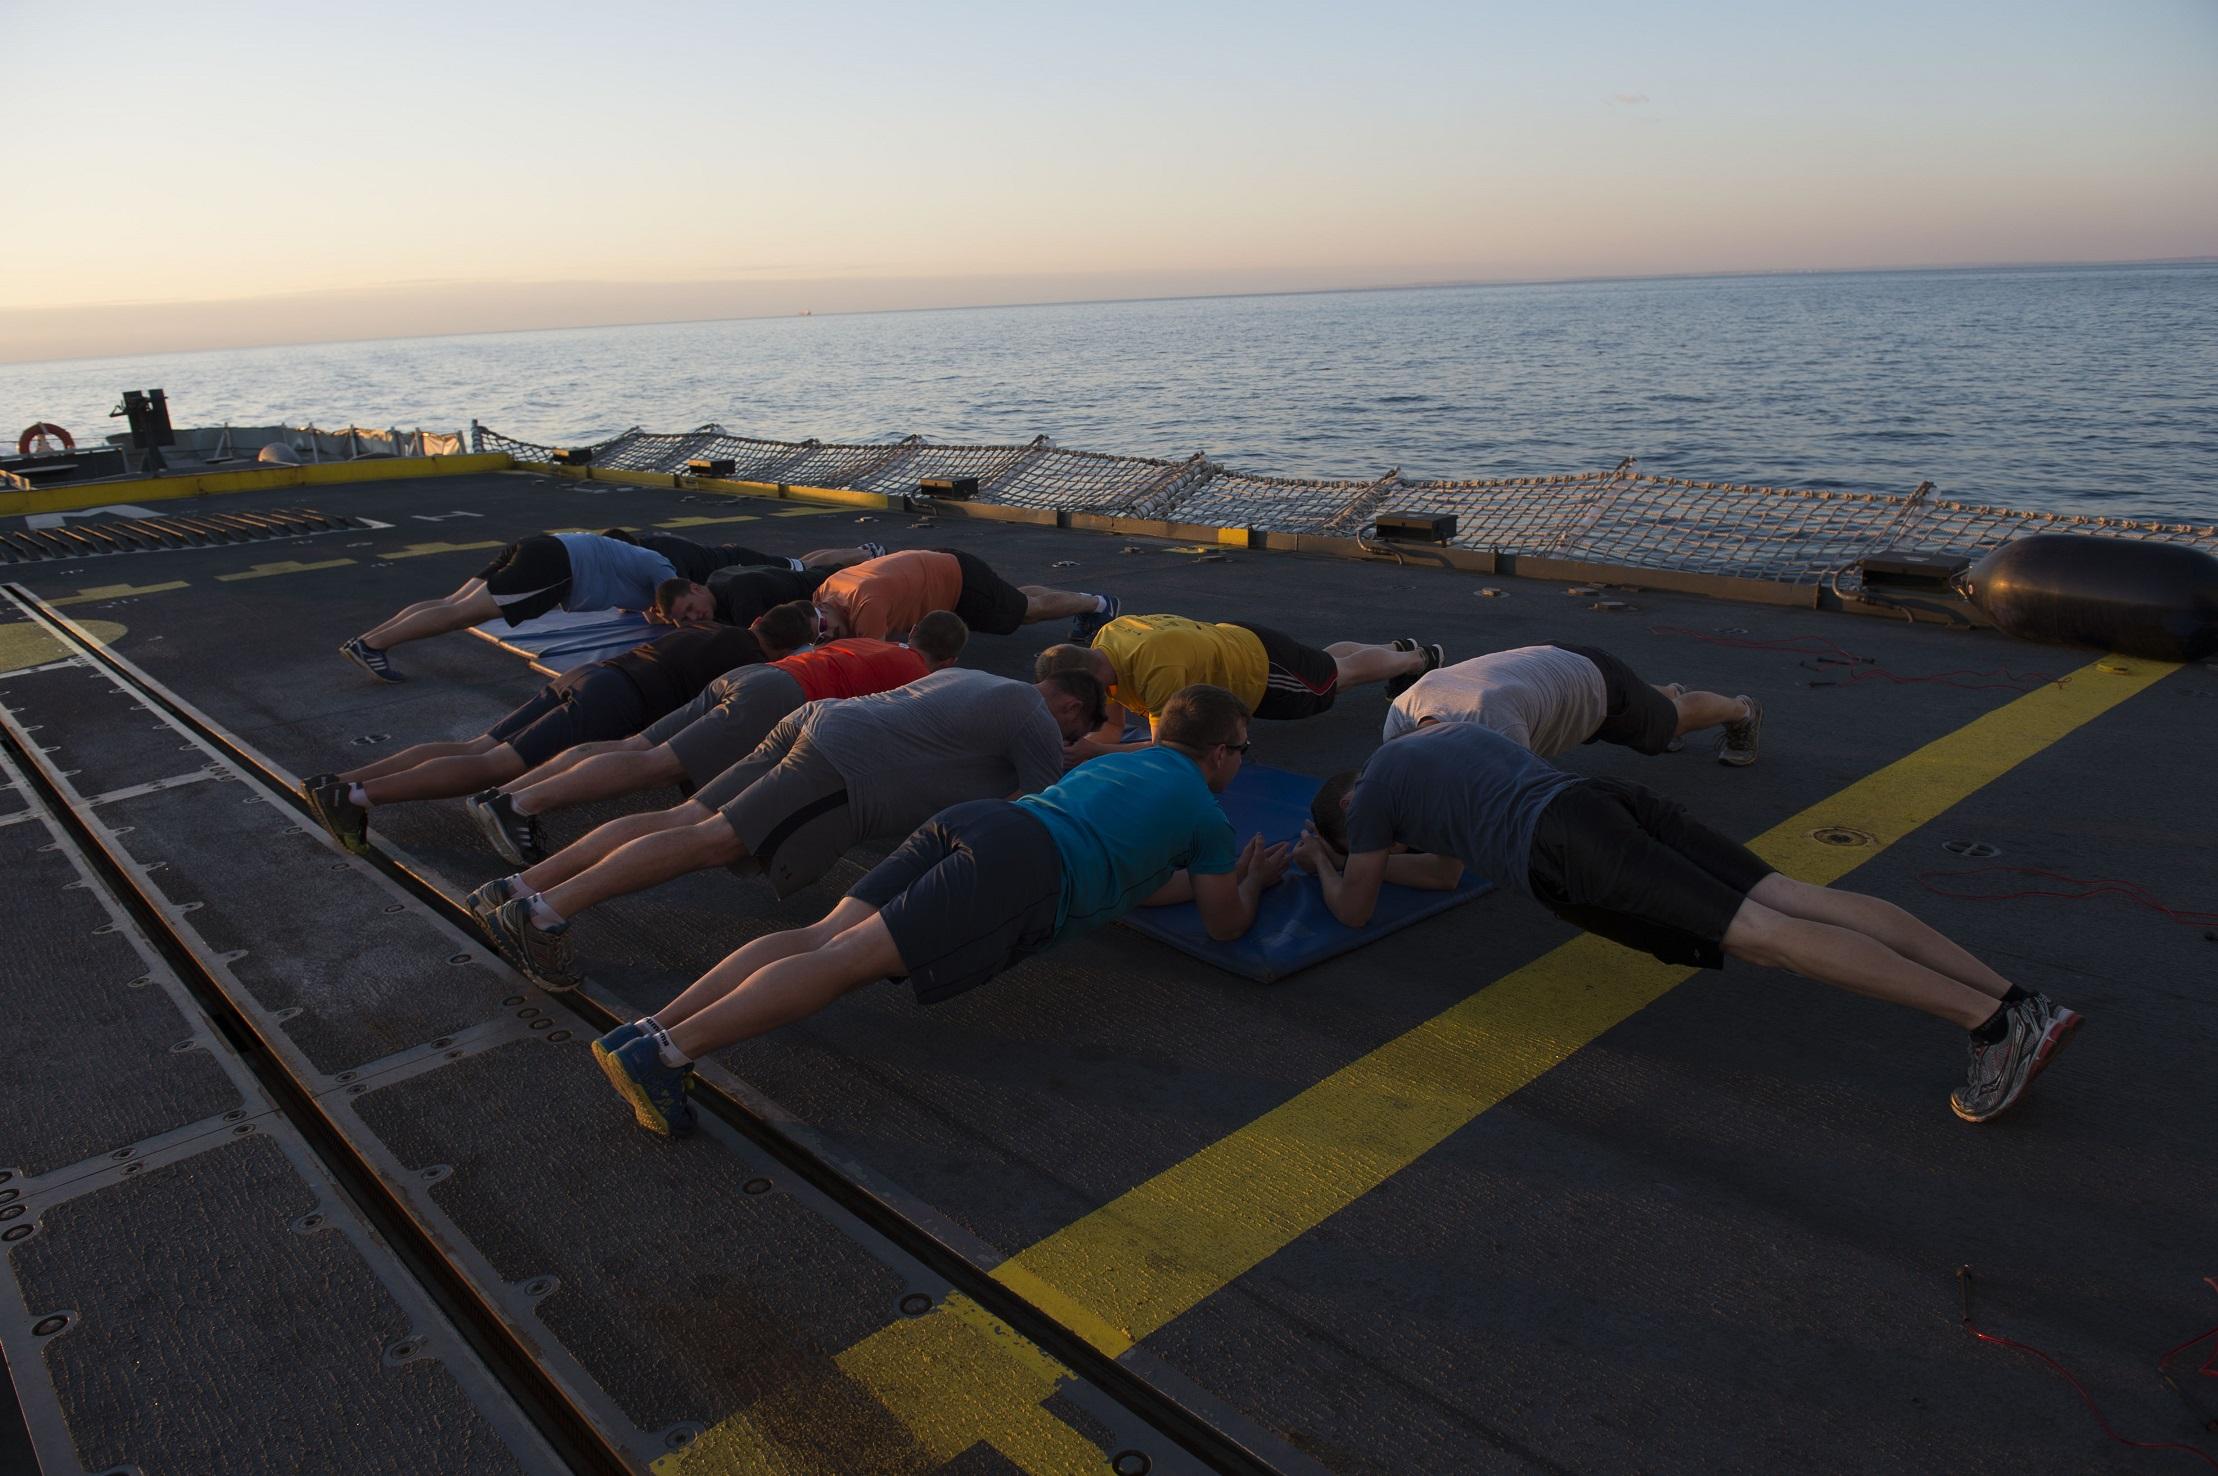 Members of HMCS Winnipeg participate in one of the ship’s sunset fitness classes led by PSP instructor, Sylvain Verrier.